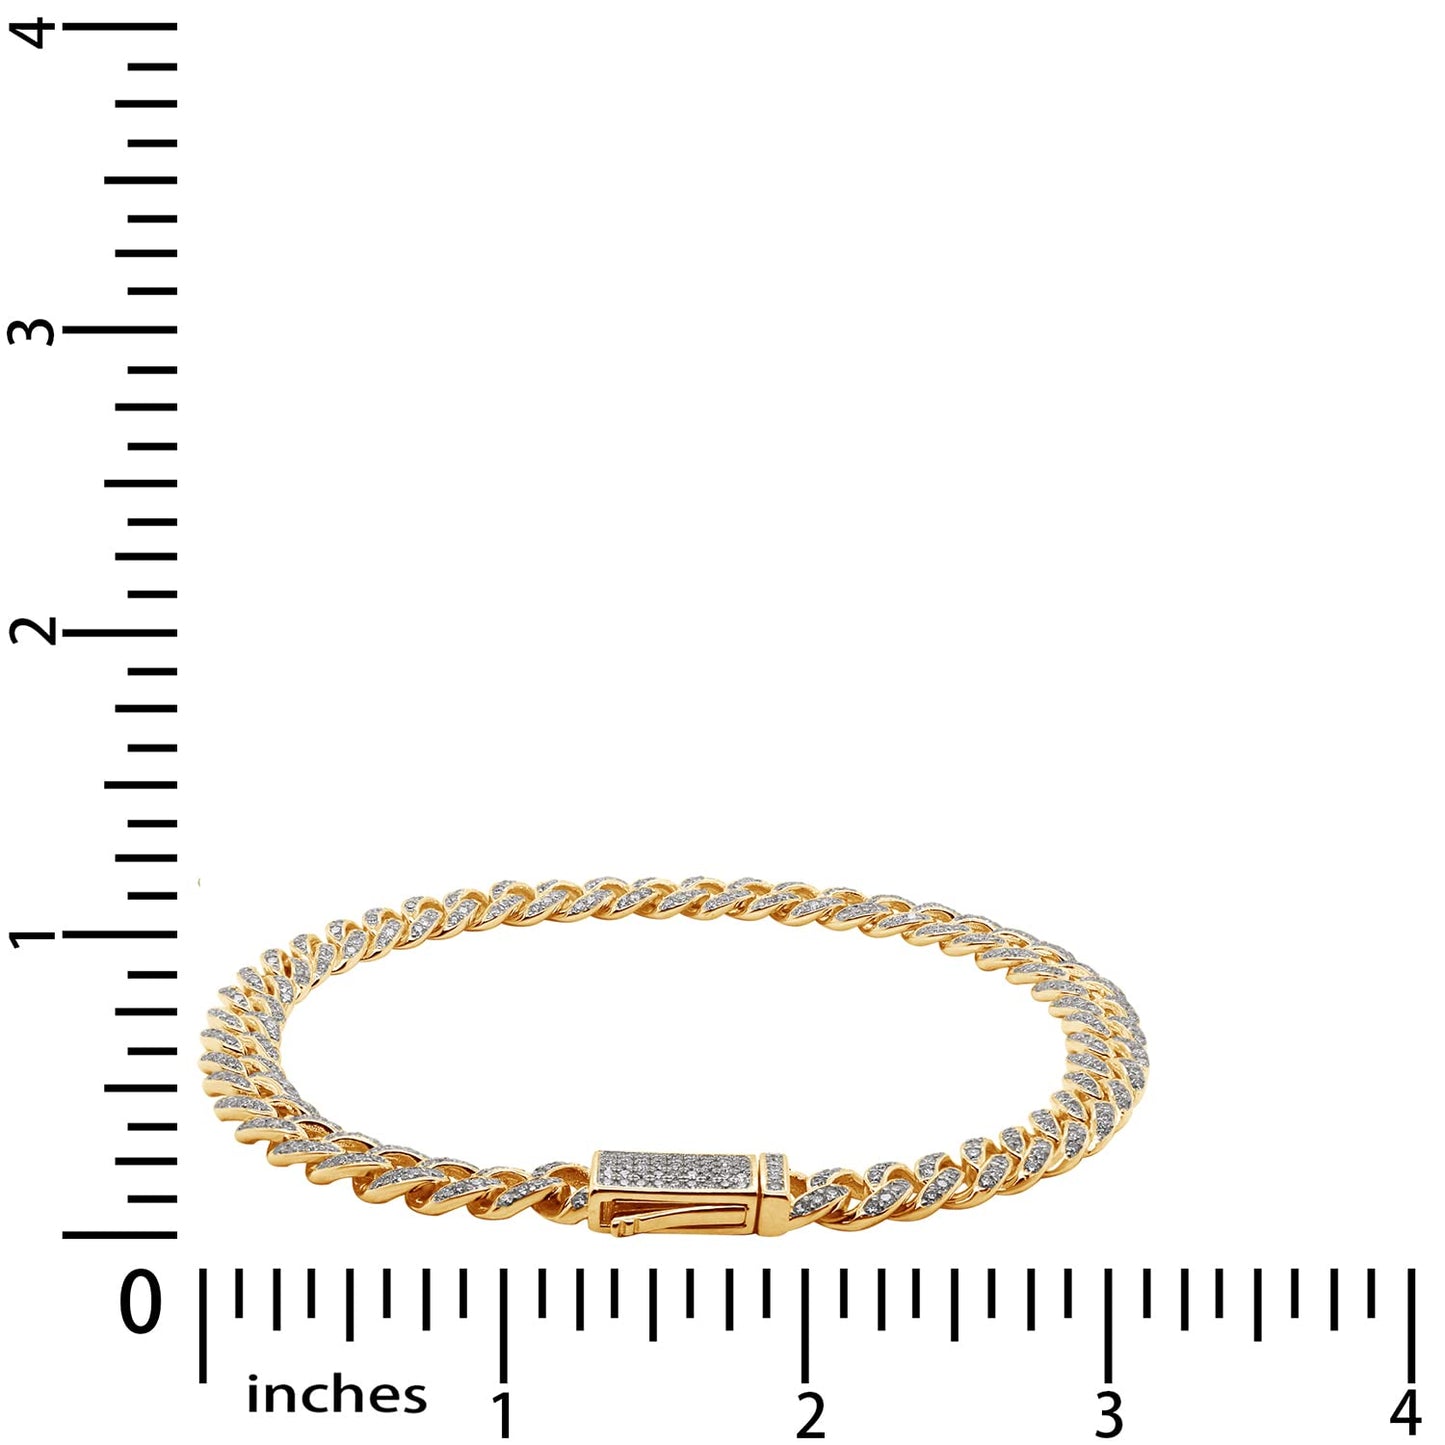 Round Lab Created Moissanite Diamond 6MM Width Cuban Chain Bracelet For Men In 14k Gold Over 925 Sterling Silver (VVS1 Clarity, 2.70 Ct-3.00 Ct), Valentine's Day Gift For Him